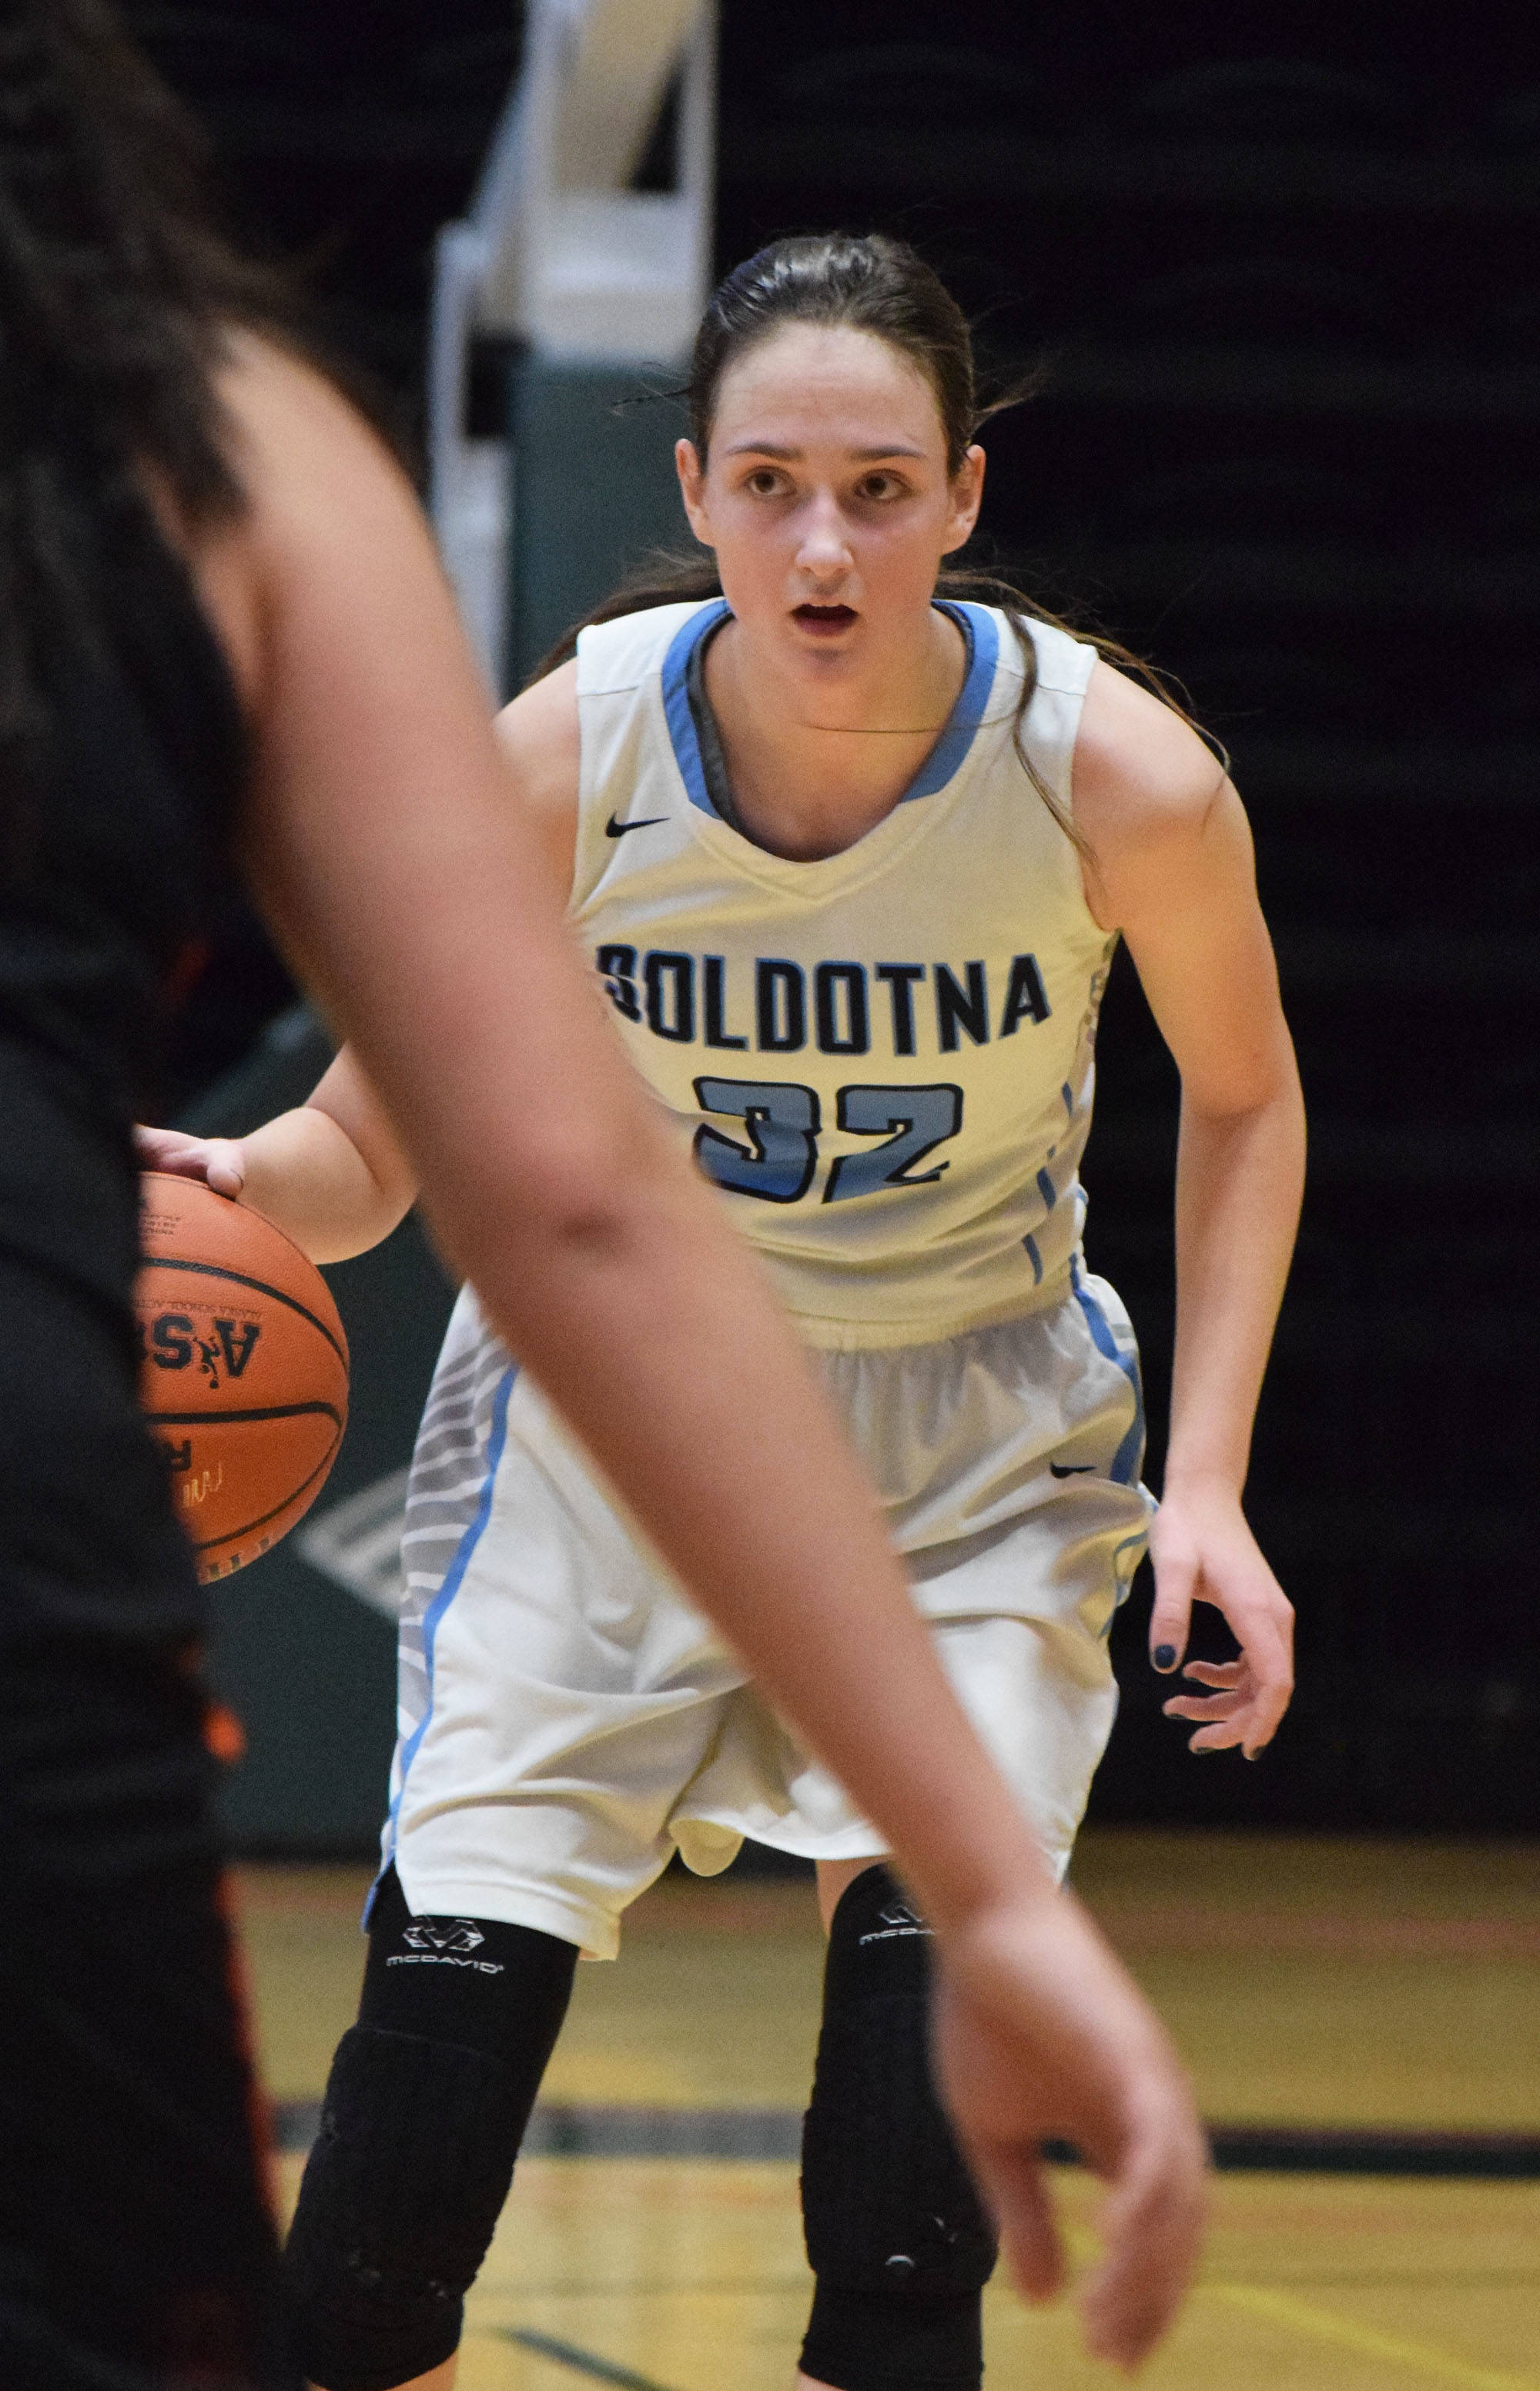 Soldotna’s Danica Schmidt surveys the West Anchorage defense Thursday, Mar. 21, 2019, at the Class 4A state championship tournament at the Alaska Airlines Center in Anchorage. (Photo by Joey Klecka/Peninsula Clarion)